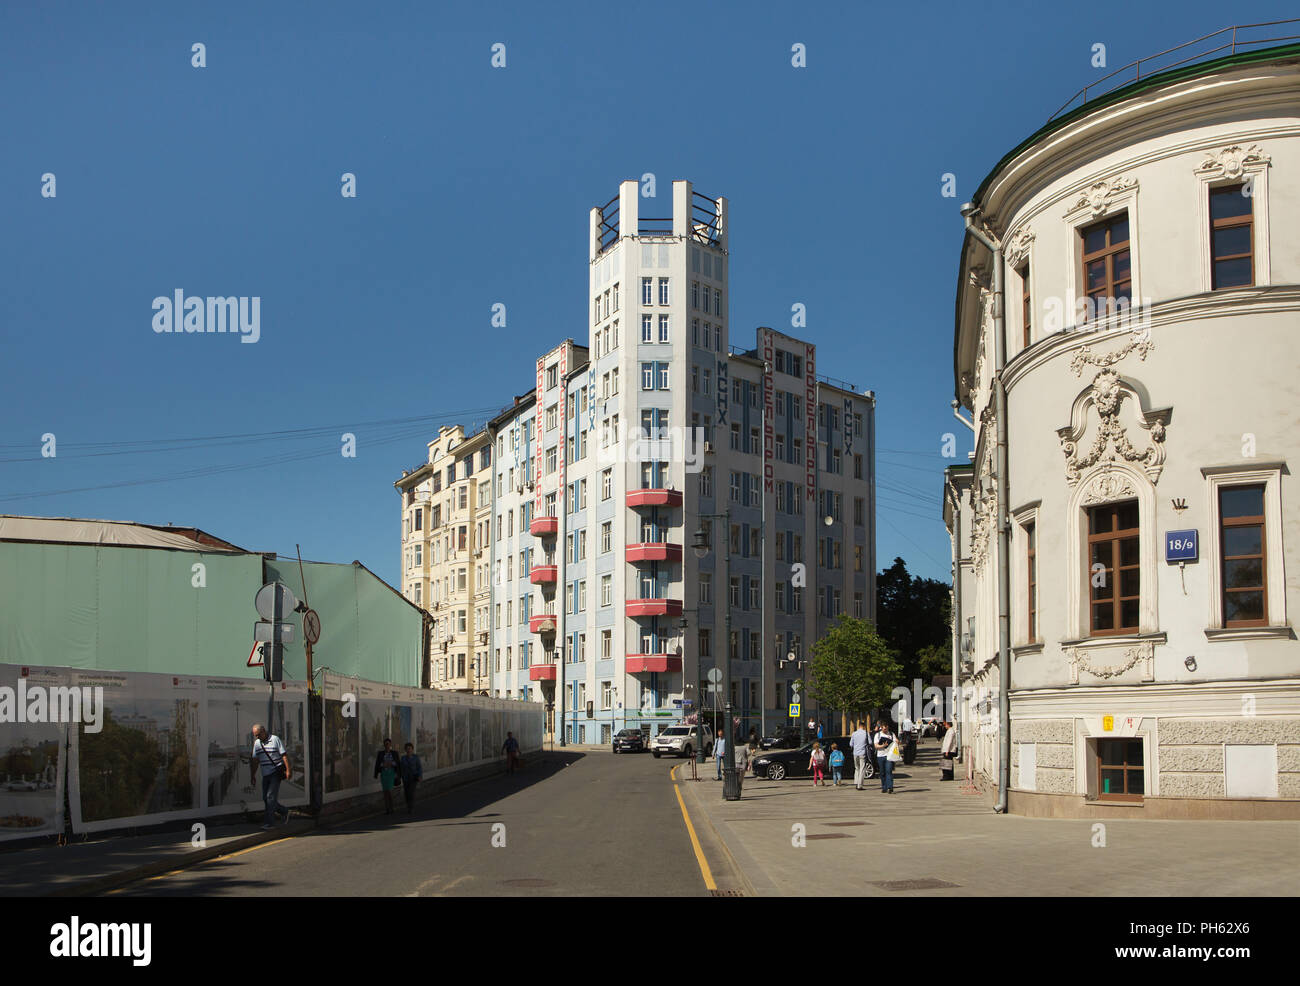 Mosselprom building designed by Soviet constructivist architect Nikolai Strukov and completed in 1925 in Moscow, Russia. The building is notable for its painted panels by the Russian avant-garde artists Alexander Rodchenko and his wife Varvara Stepanova. Stock Photo